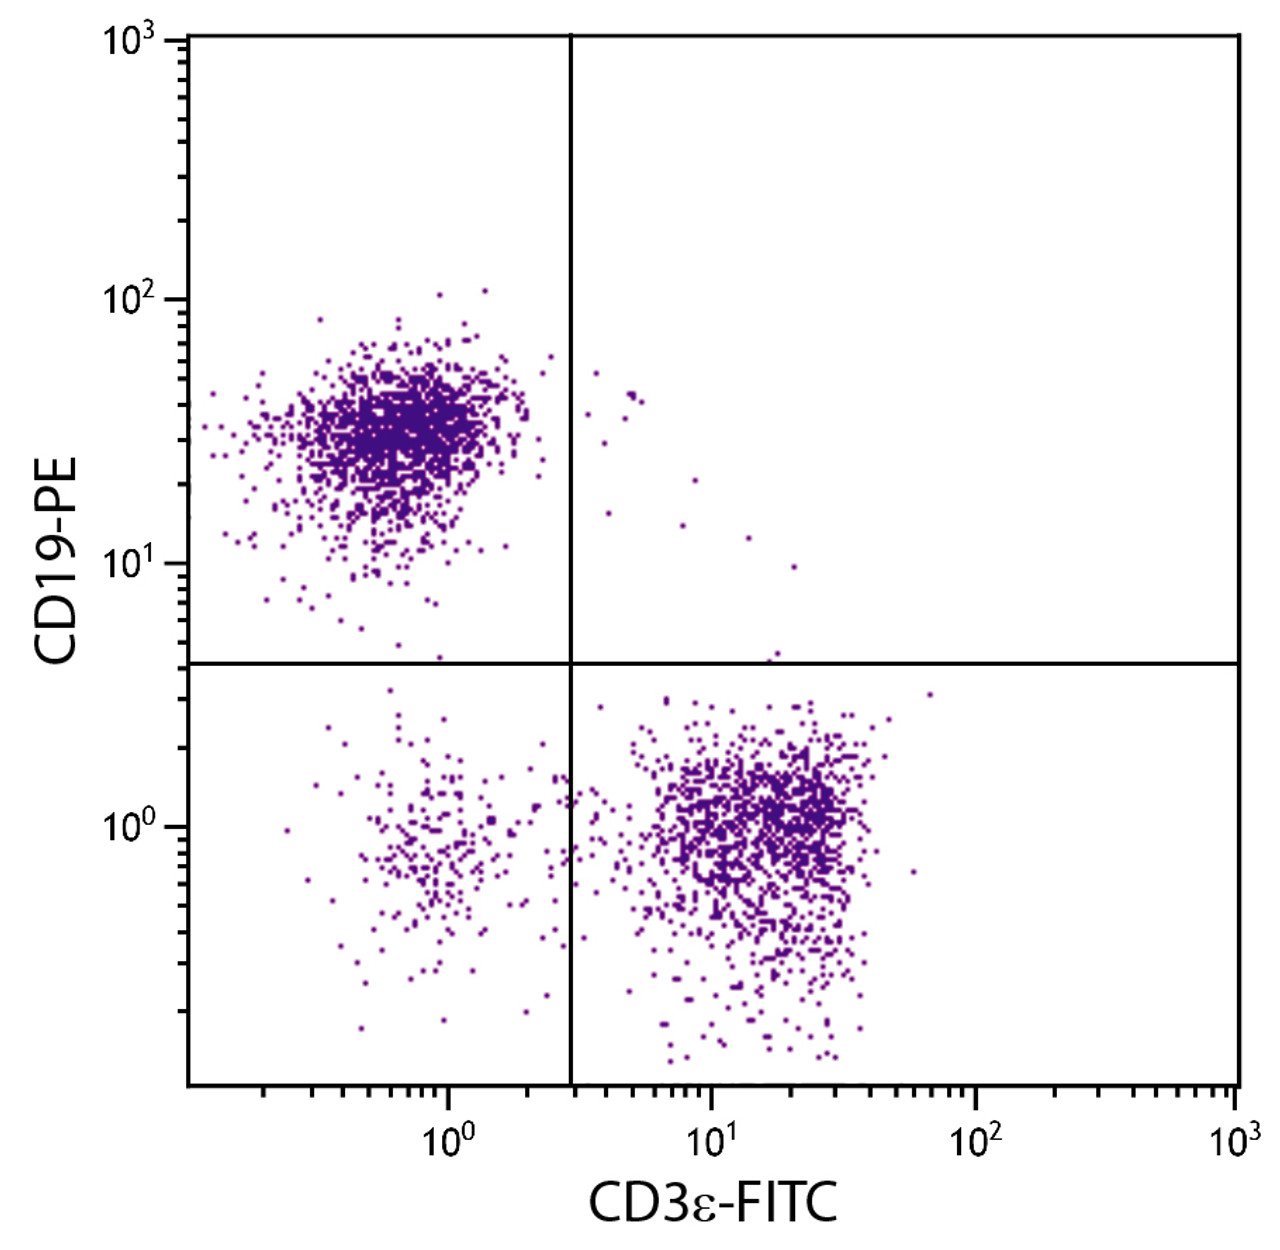 C57BL/6 mouse splenocytes were stained with Rat Anti-Mouse CD3?-FITC (Cat. No. 98-576) and Rat Anti-Mouse CD19-PE .